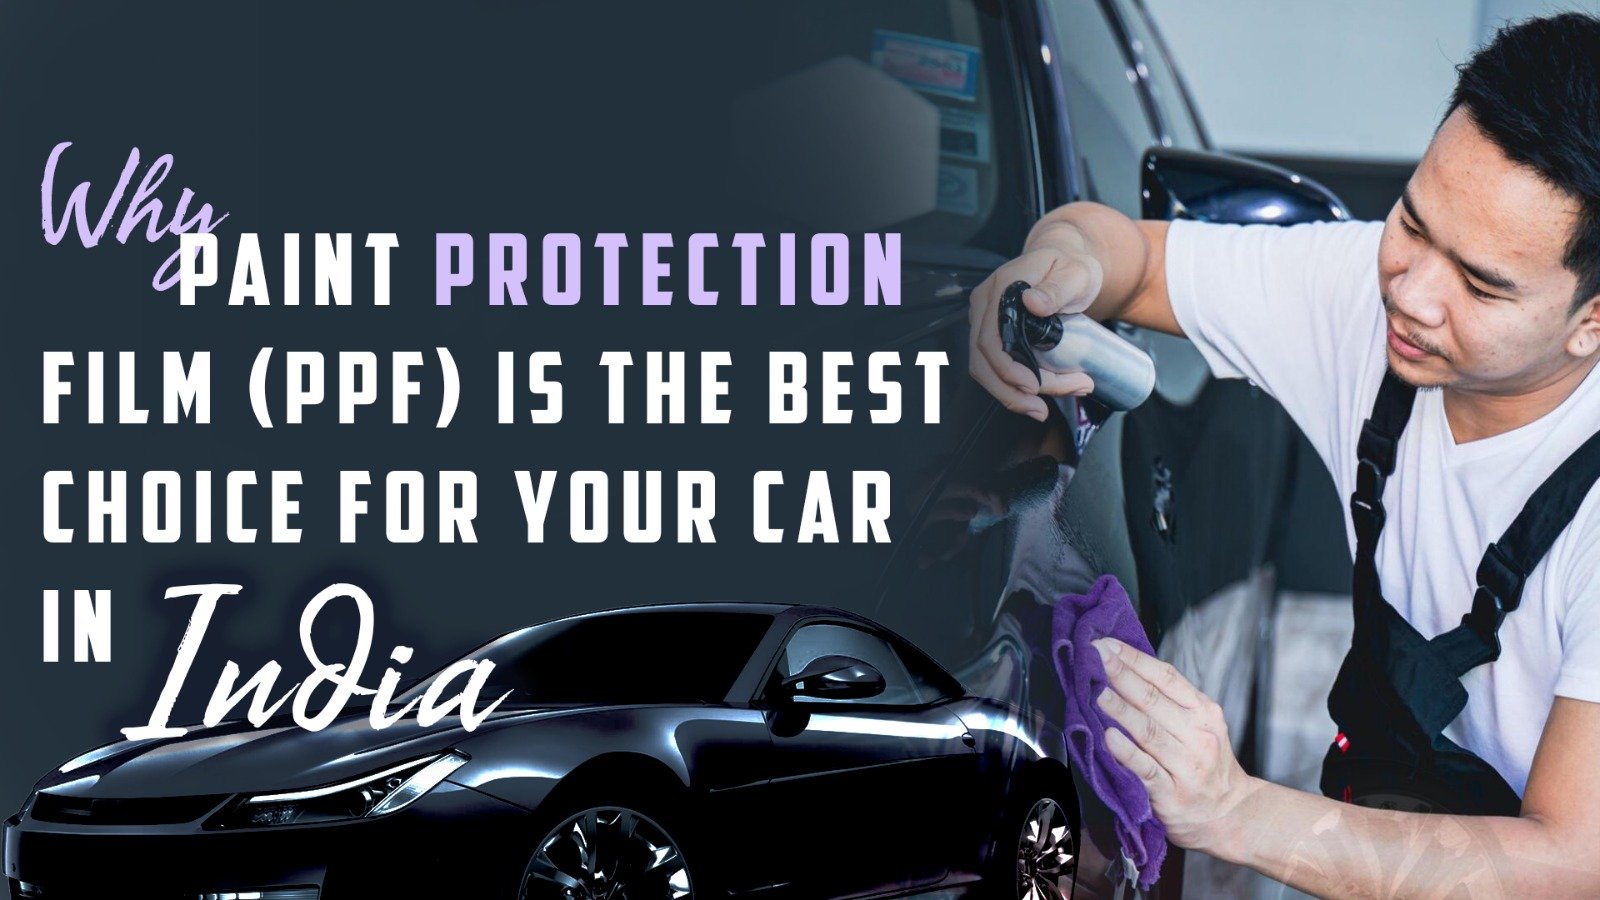 Why Paint Protection Film (PPF) is the Best Choice for Your Car in India